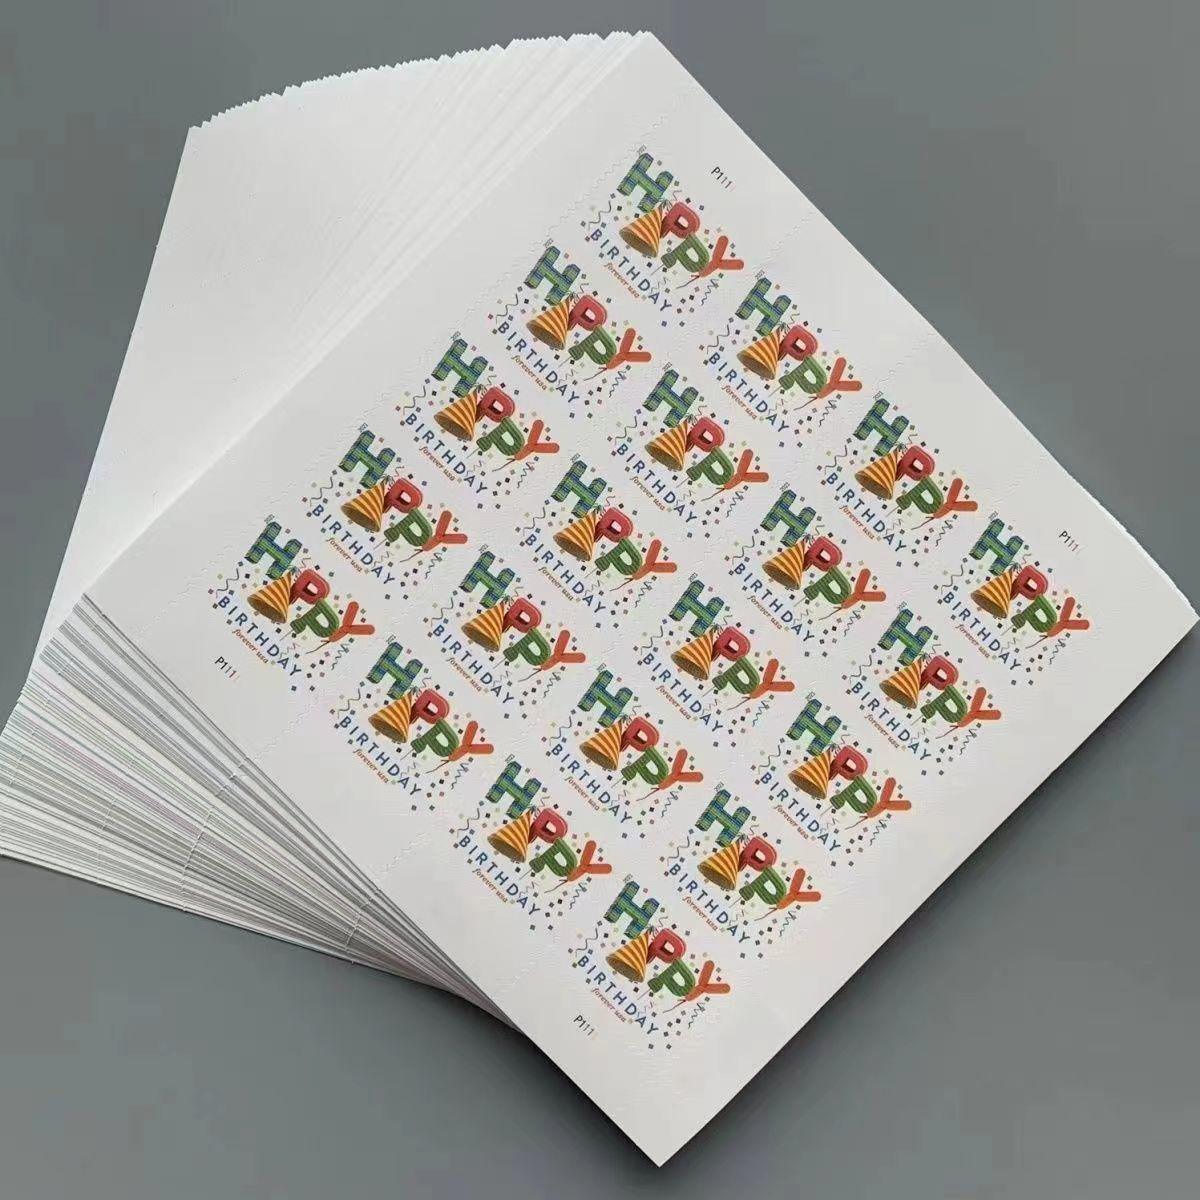 A stack of Happy Birthday 2021 - 5 Sheets / 100 Pcs featuring a colorful "happy holidays" design with festive graphical elements from 2021.